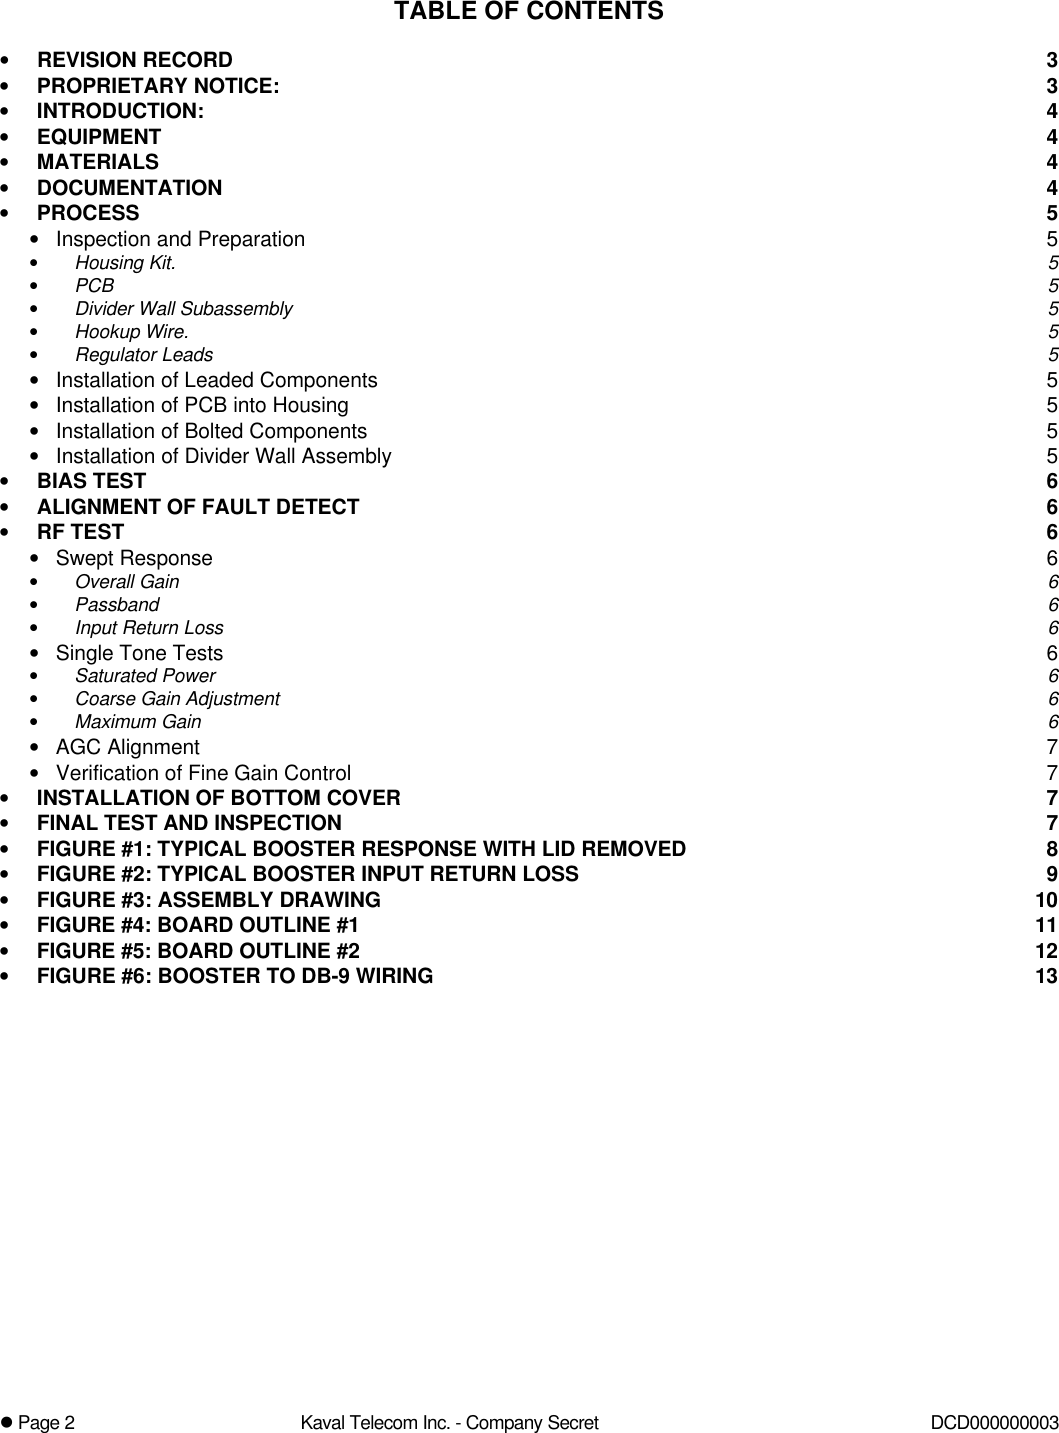 l Page 2Kaval Telecom Inc. - Company Secret DCD000000003TABLE OF CONTENTS•REVISION RECORD 3•PROPRIETARY NOTICE: 3•INTRODUCTION: 4•EQUIPMENT 4•MATERIALS 4•DOCUMENTATION 4•PROCESS 5•Inspection and Preparation 5•Housing Kit. 5•PCB 5•Divider Wall Subassembly 5•Hookup Wire. 5•Regulator Leads 5•Installation of Leaded Components 5•Installation of PCB into Housing 5•Installation of Bolted Components 5•Installation of Divider Wall Assembly 5•BIAS TEST 6•ALIGNMENT OF FAULT DETECT 6•RF TEST 6•Swept Response 6•Overall Gain 6•Passband 6•Input Return Loss 6•Single Tone Tests 6•Saturated Power 6•Coarse Gain Adjustment 6•Maximum Gain 6•AGC Alignment 7•Verification of Fine Gain Control 7•INSTALLATION OF BOTTOM COVER 7•FINAL TEST AND INSPECTION 7•FIGURE #1: TYPICAL BOOSTER RESPONSE WITH LID REMOVED 8•FIGURE #2: TYPICAL BOOSTER INPUT RETURN LOSS 9•FIGURE #3: ASSEMBLY DRAWING 10•FIGURE #4: BOARD OUTLINE #1 11•FIGURE #5: BOARD OUTLINE #2 12•FIGURE #6: BOOSTER TO DB-9 WIRING 13